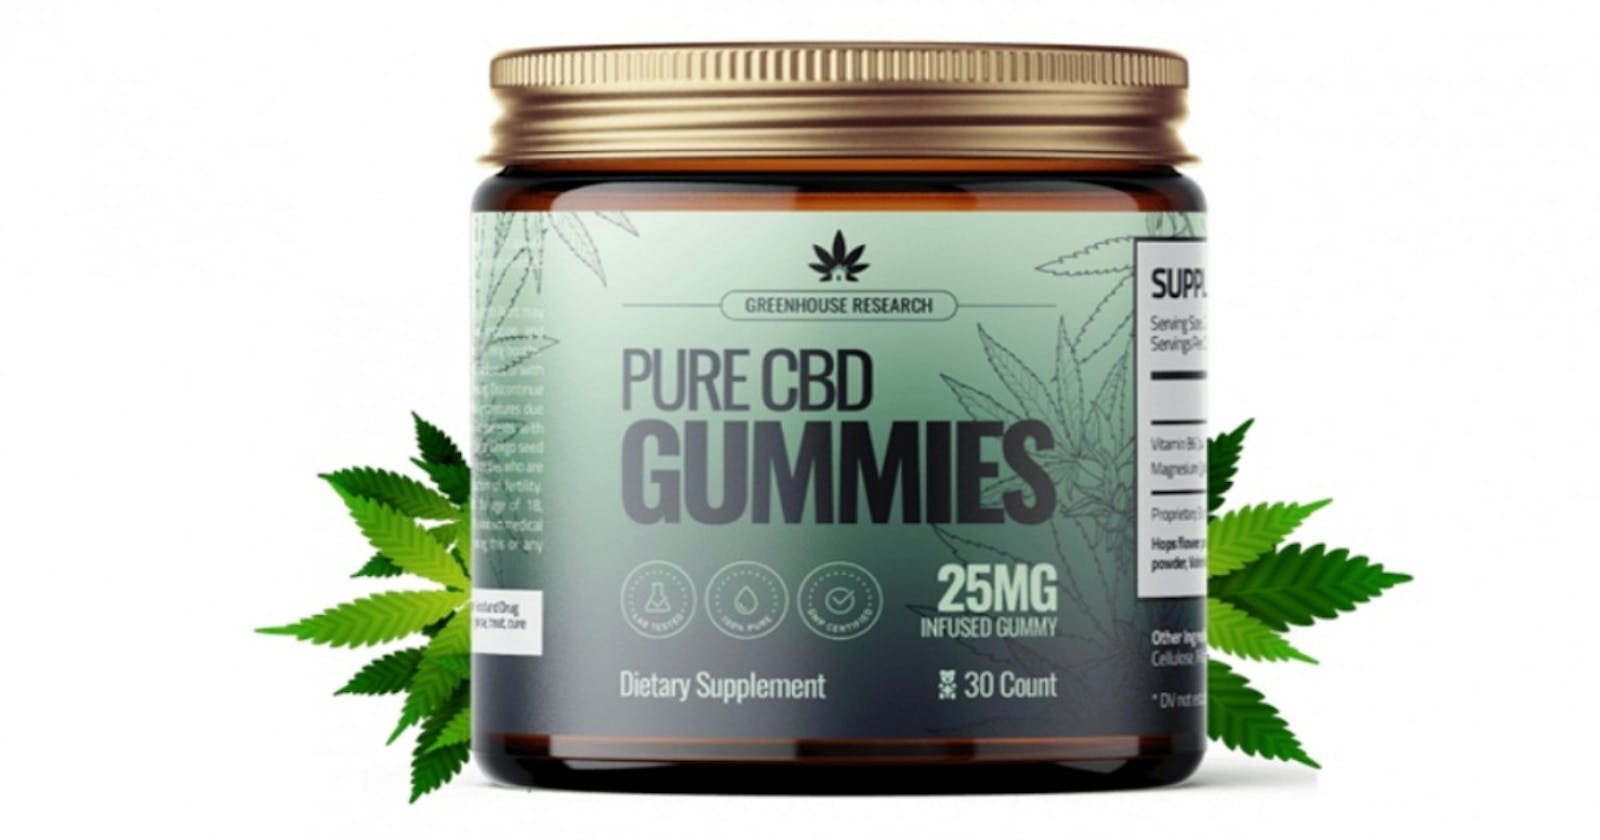 PurekanaCBD Gummies 25 Mg SCAM Alert Don’t Buy Before Read About Reviews![HOAX INFORMED]